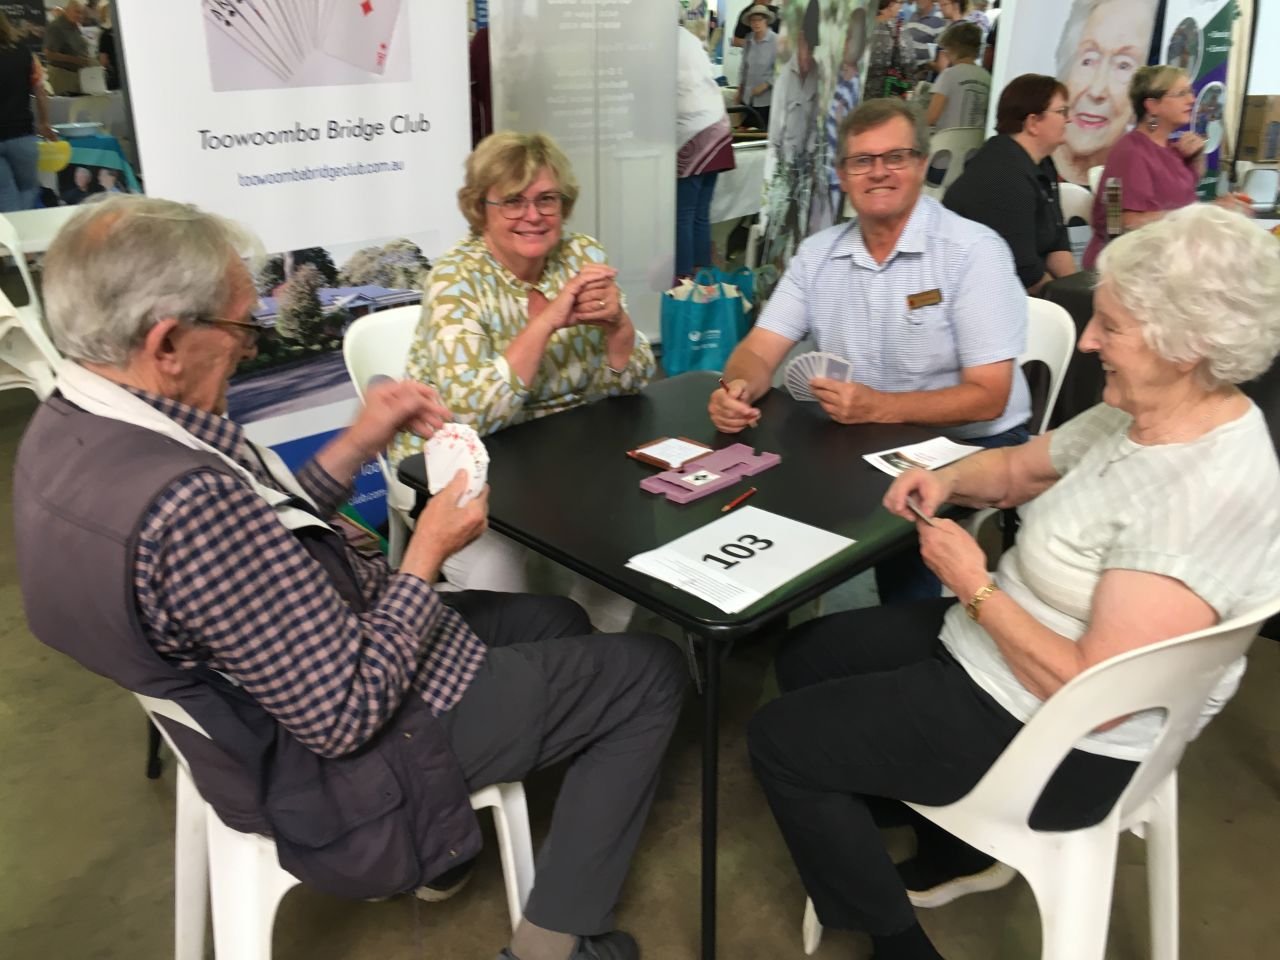 Toowoomba Bridge Club was just one of the social clubs gaining new members at the expo.